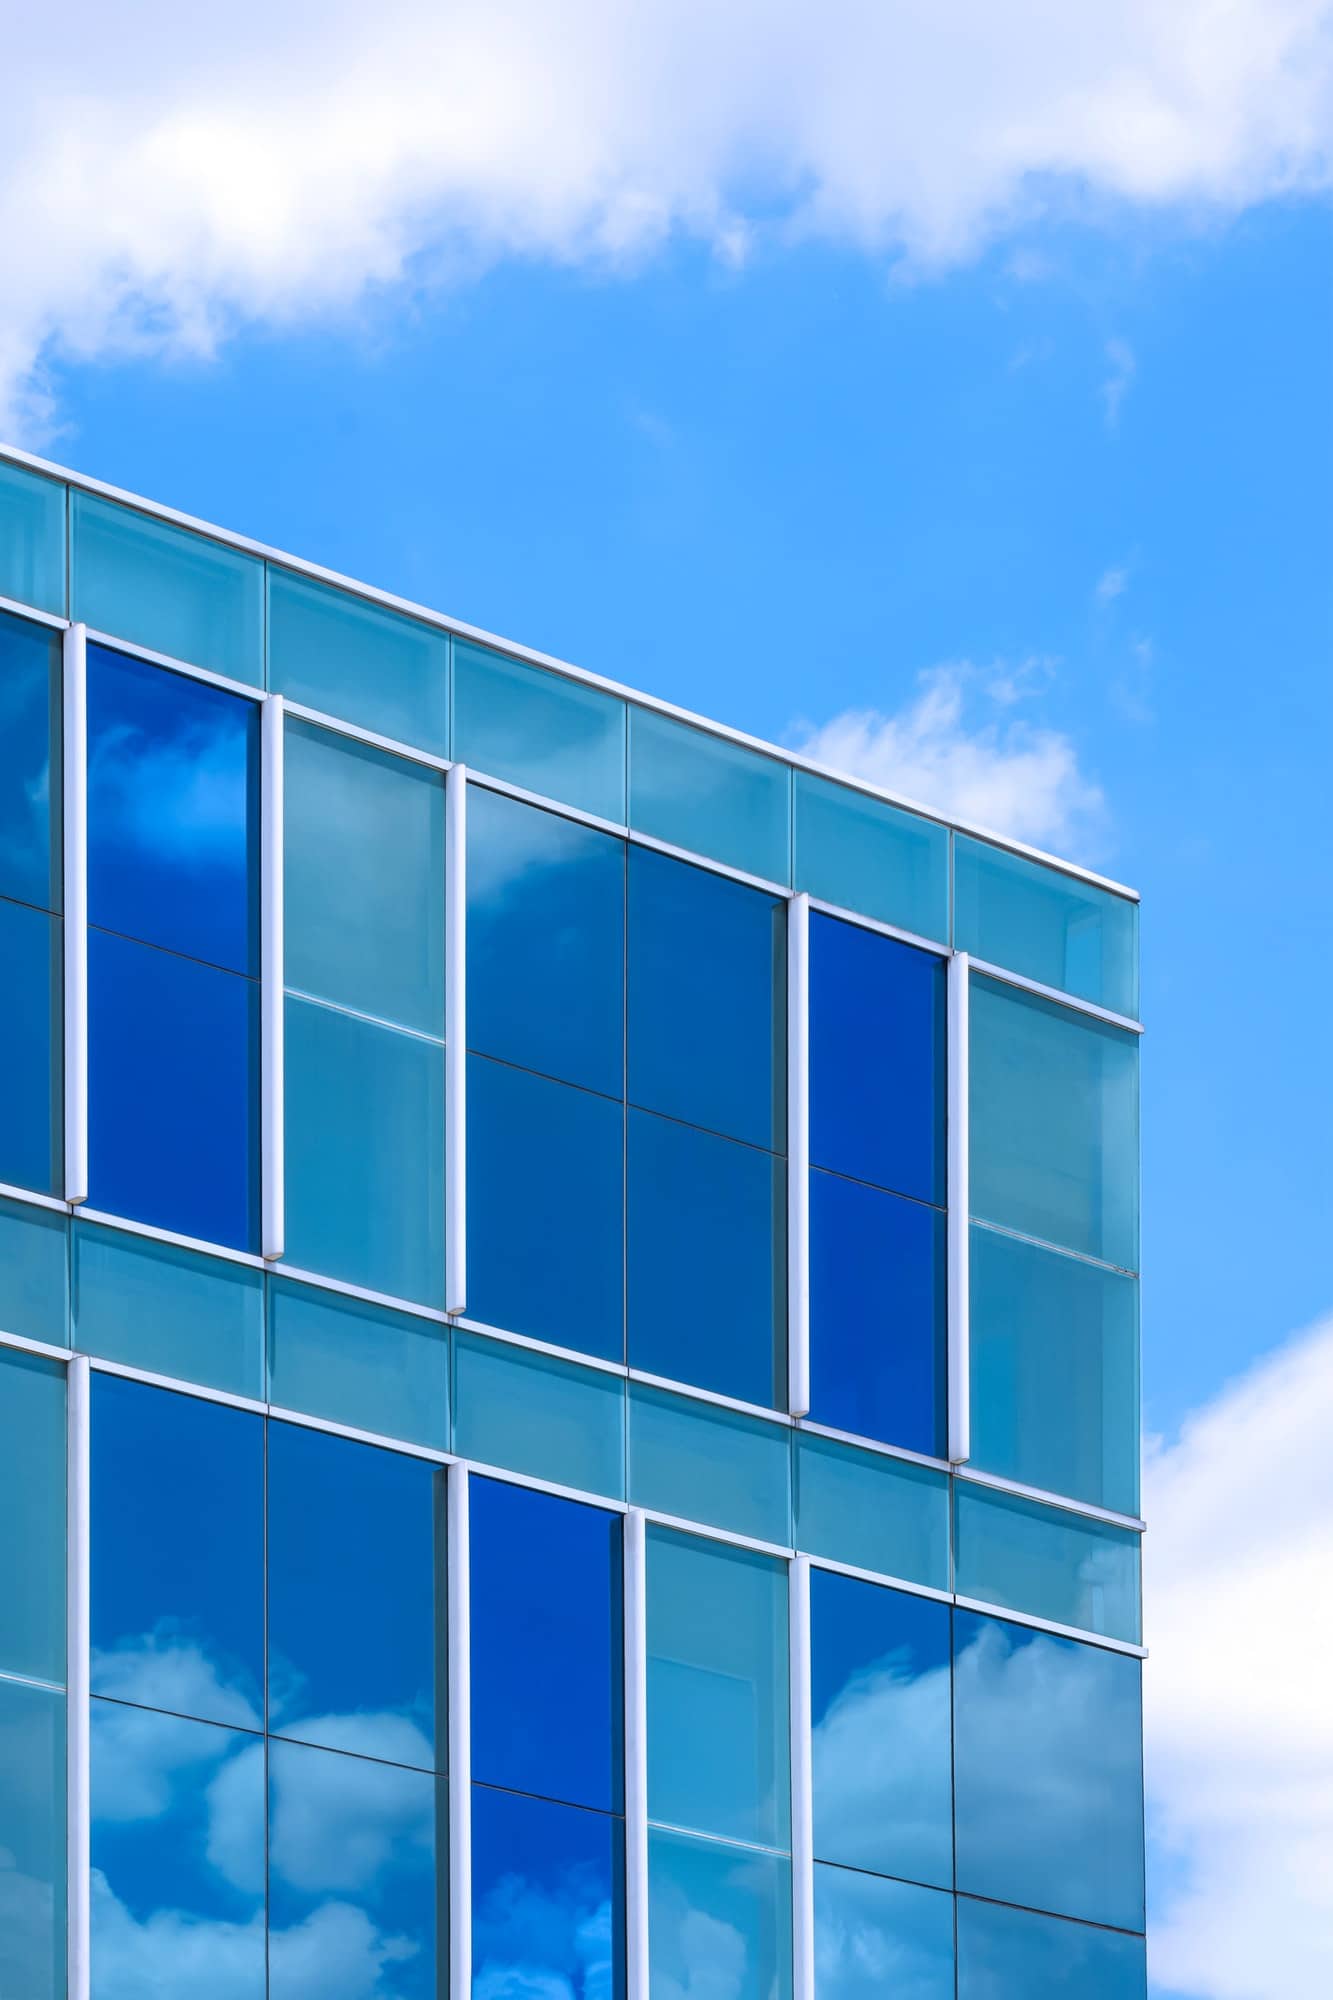 Stunning reflection on surface of modern glass office building against blue sky background